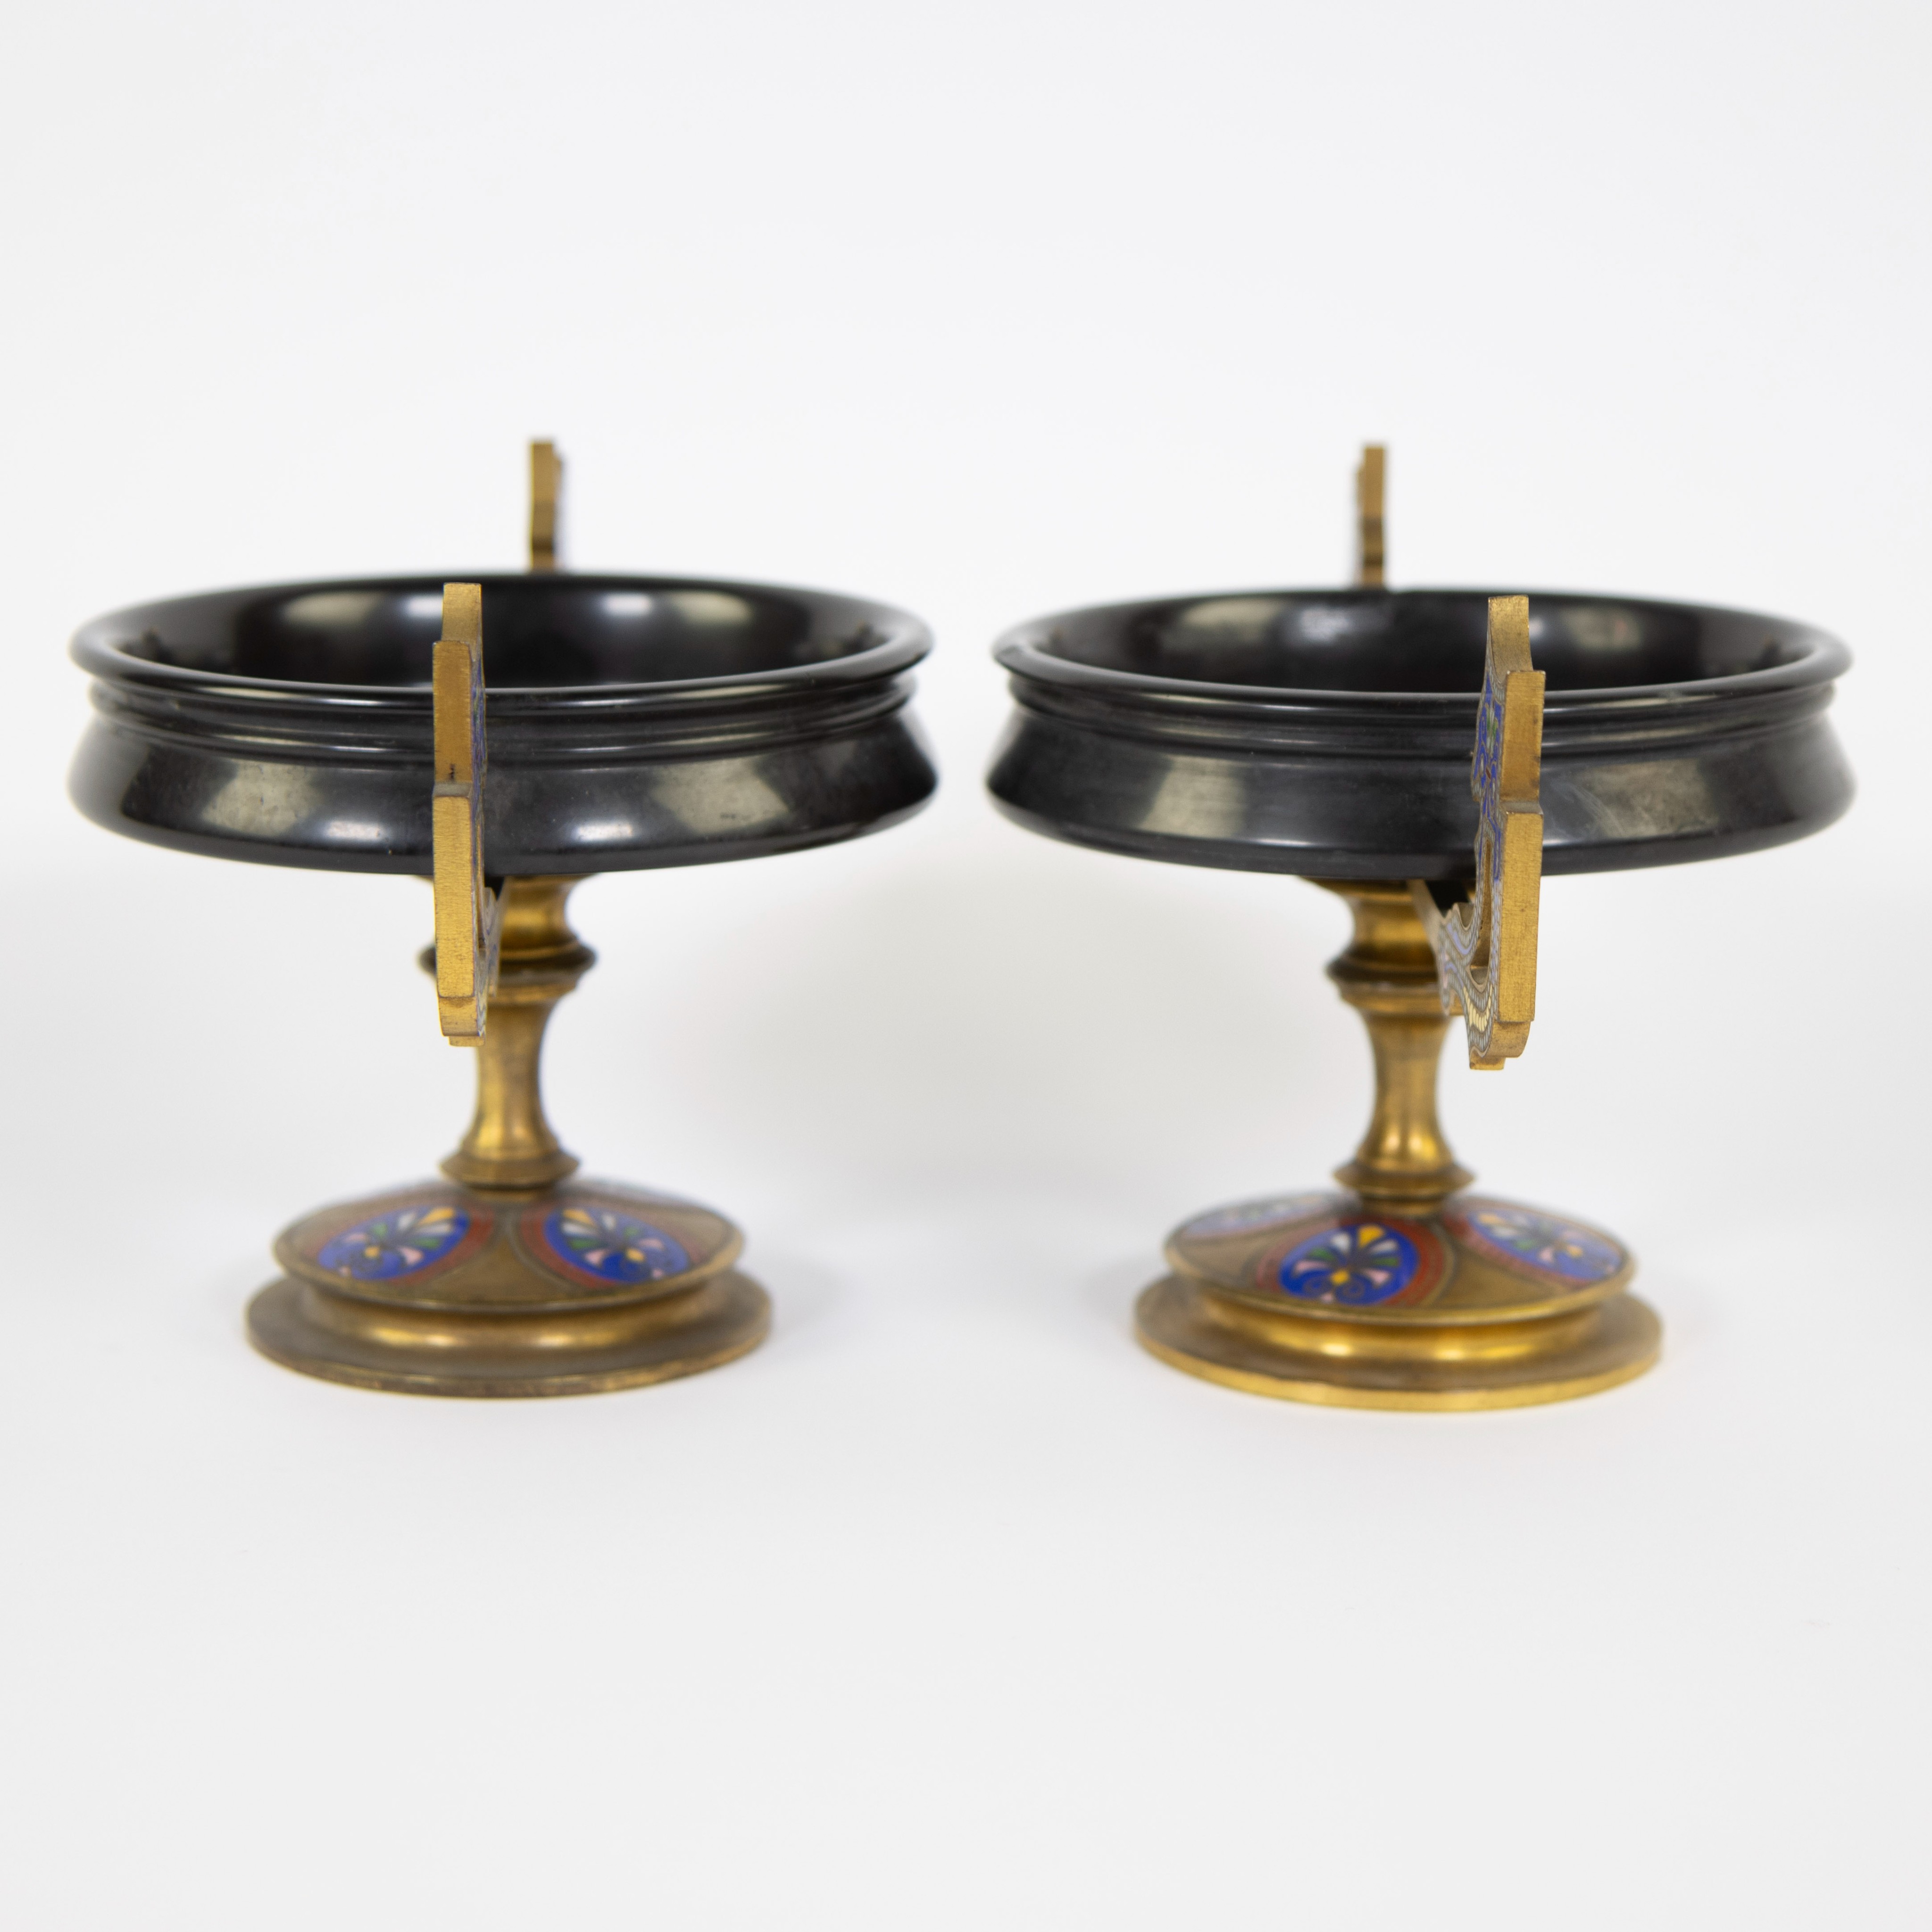 Pair of mantel pieces, bowl in blue and enamel on gilt bronze on foot, Paris late 19th century - Image 3 of 7